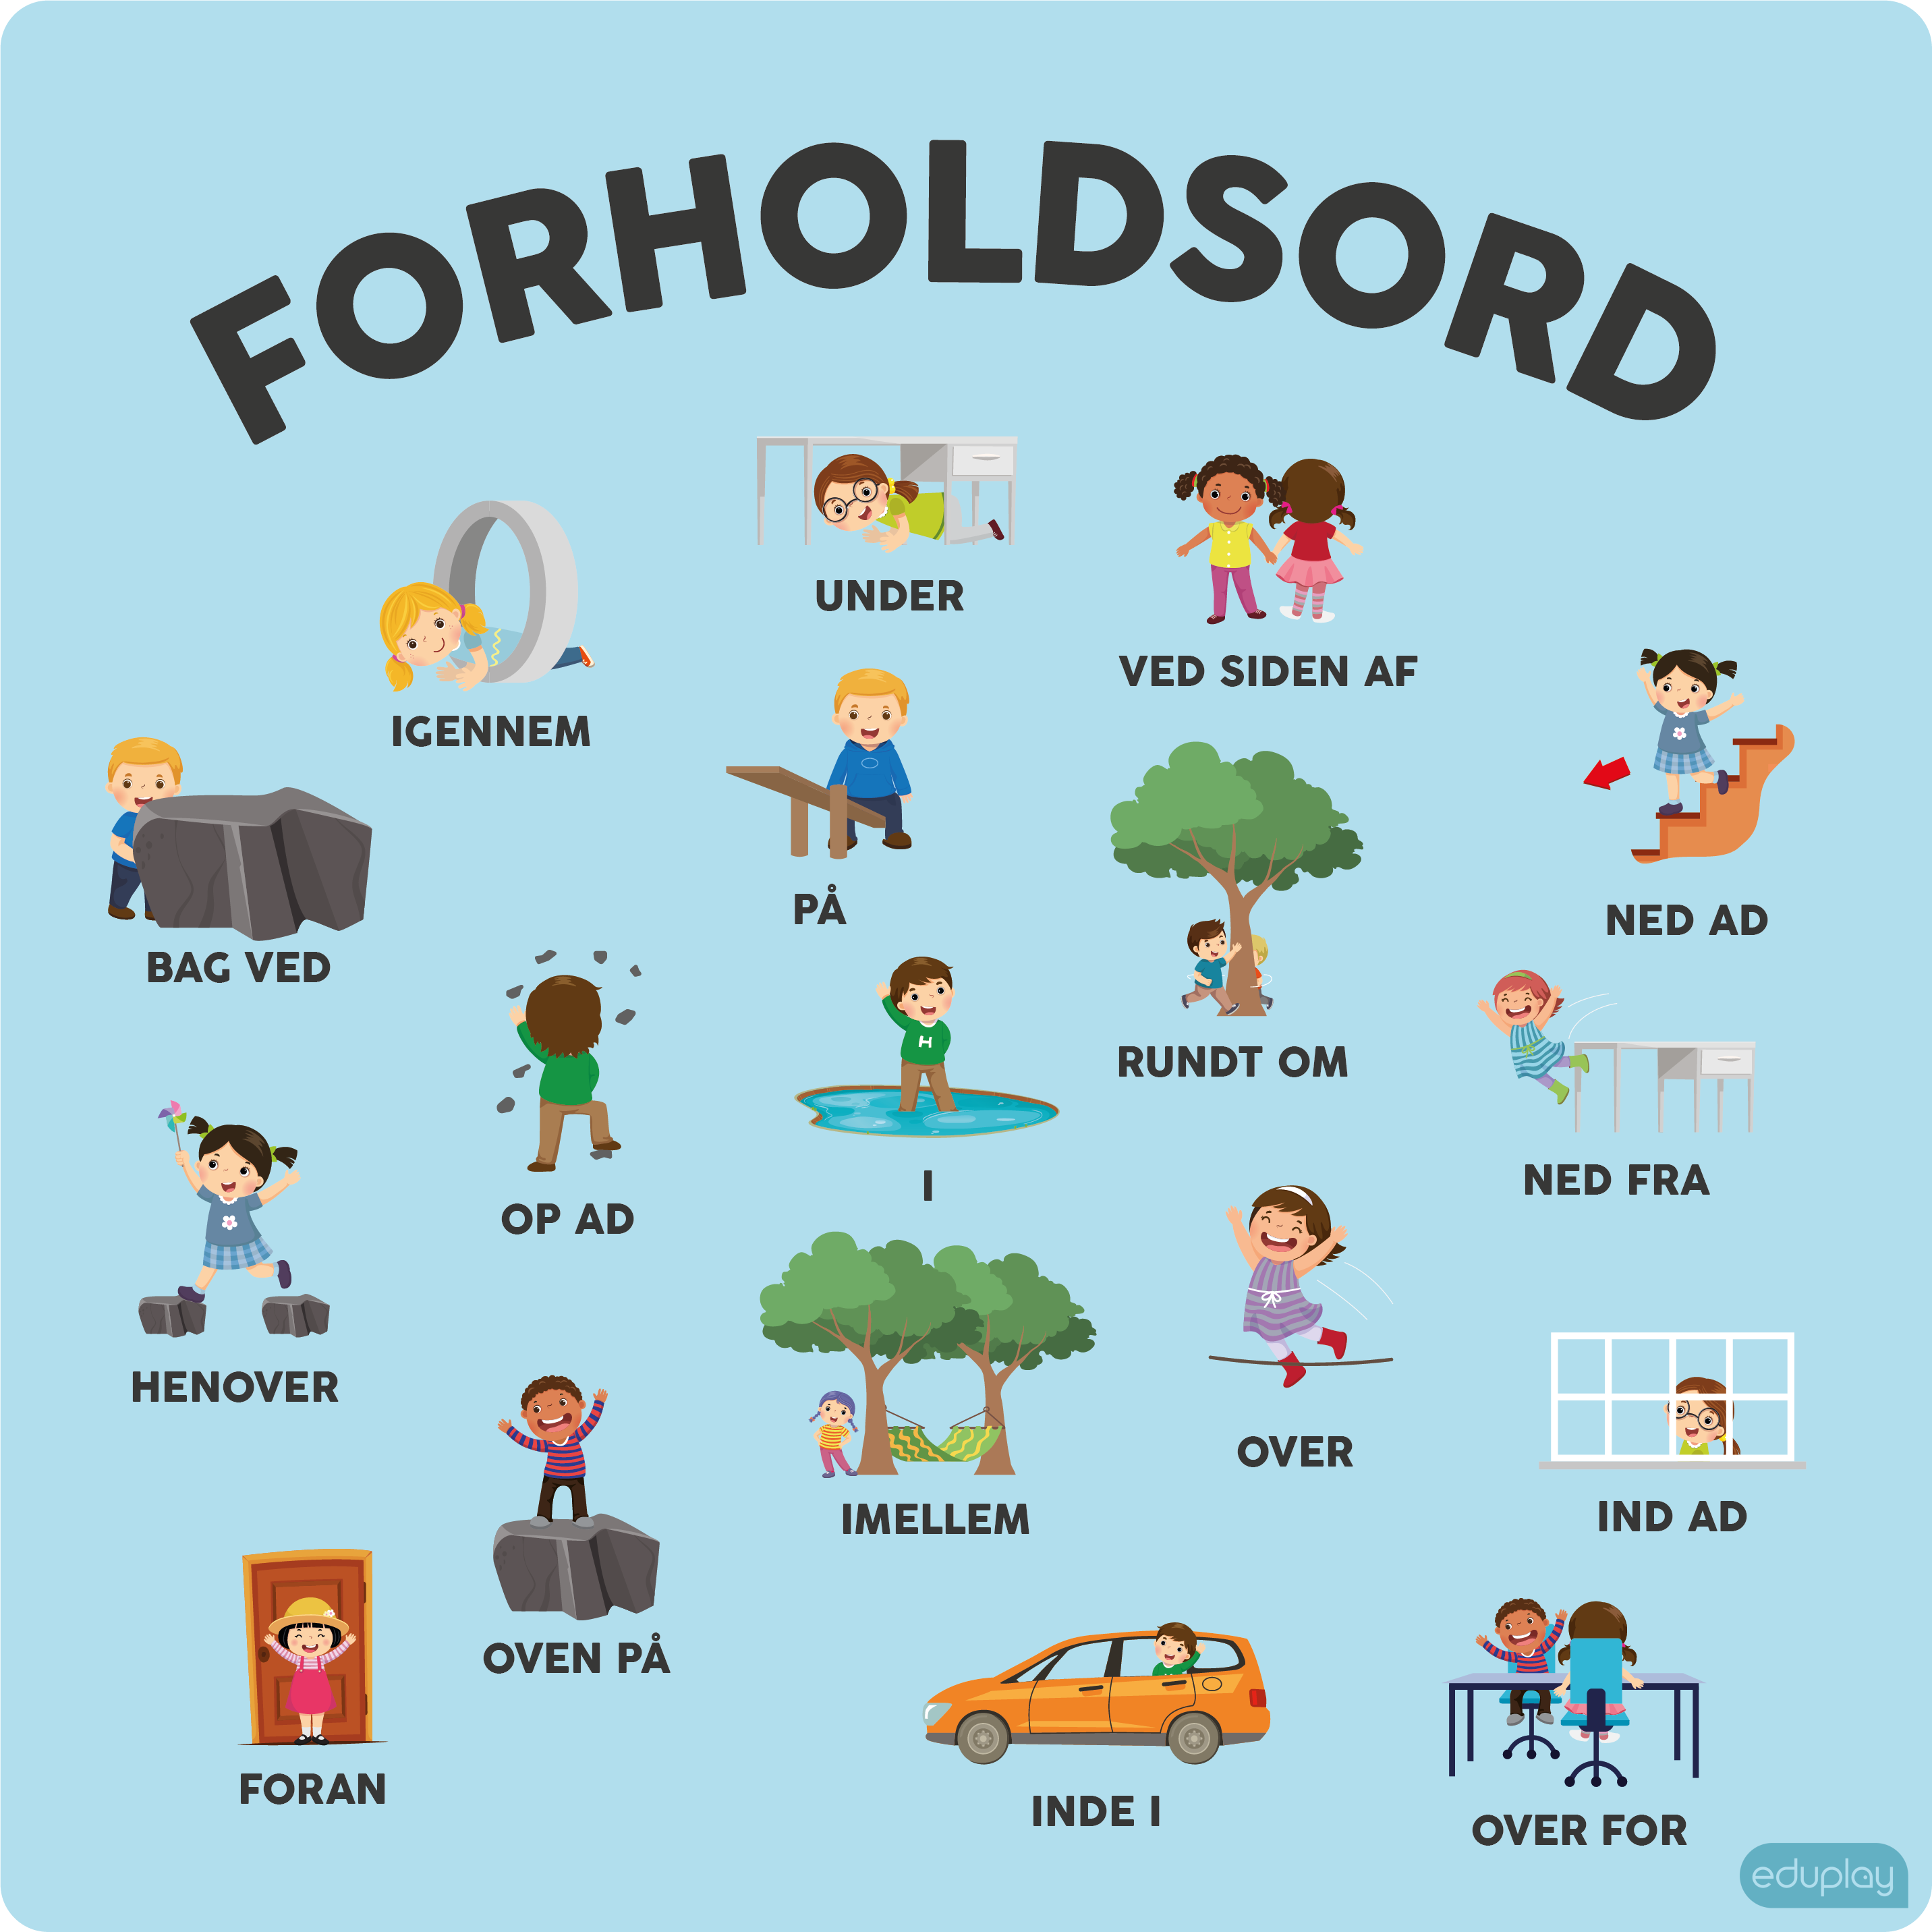 Forholdsord